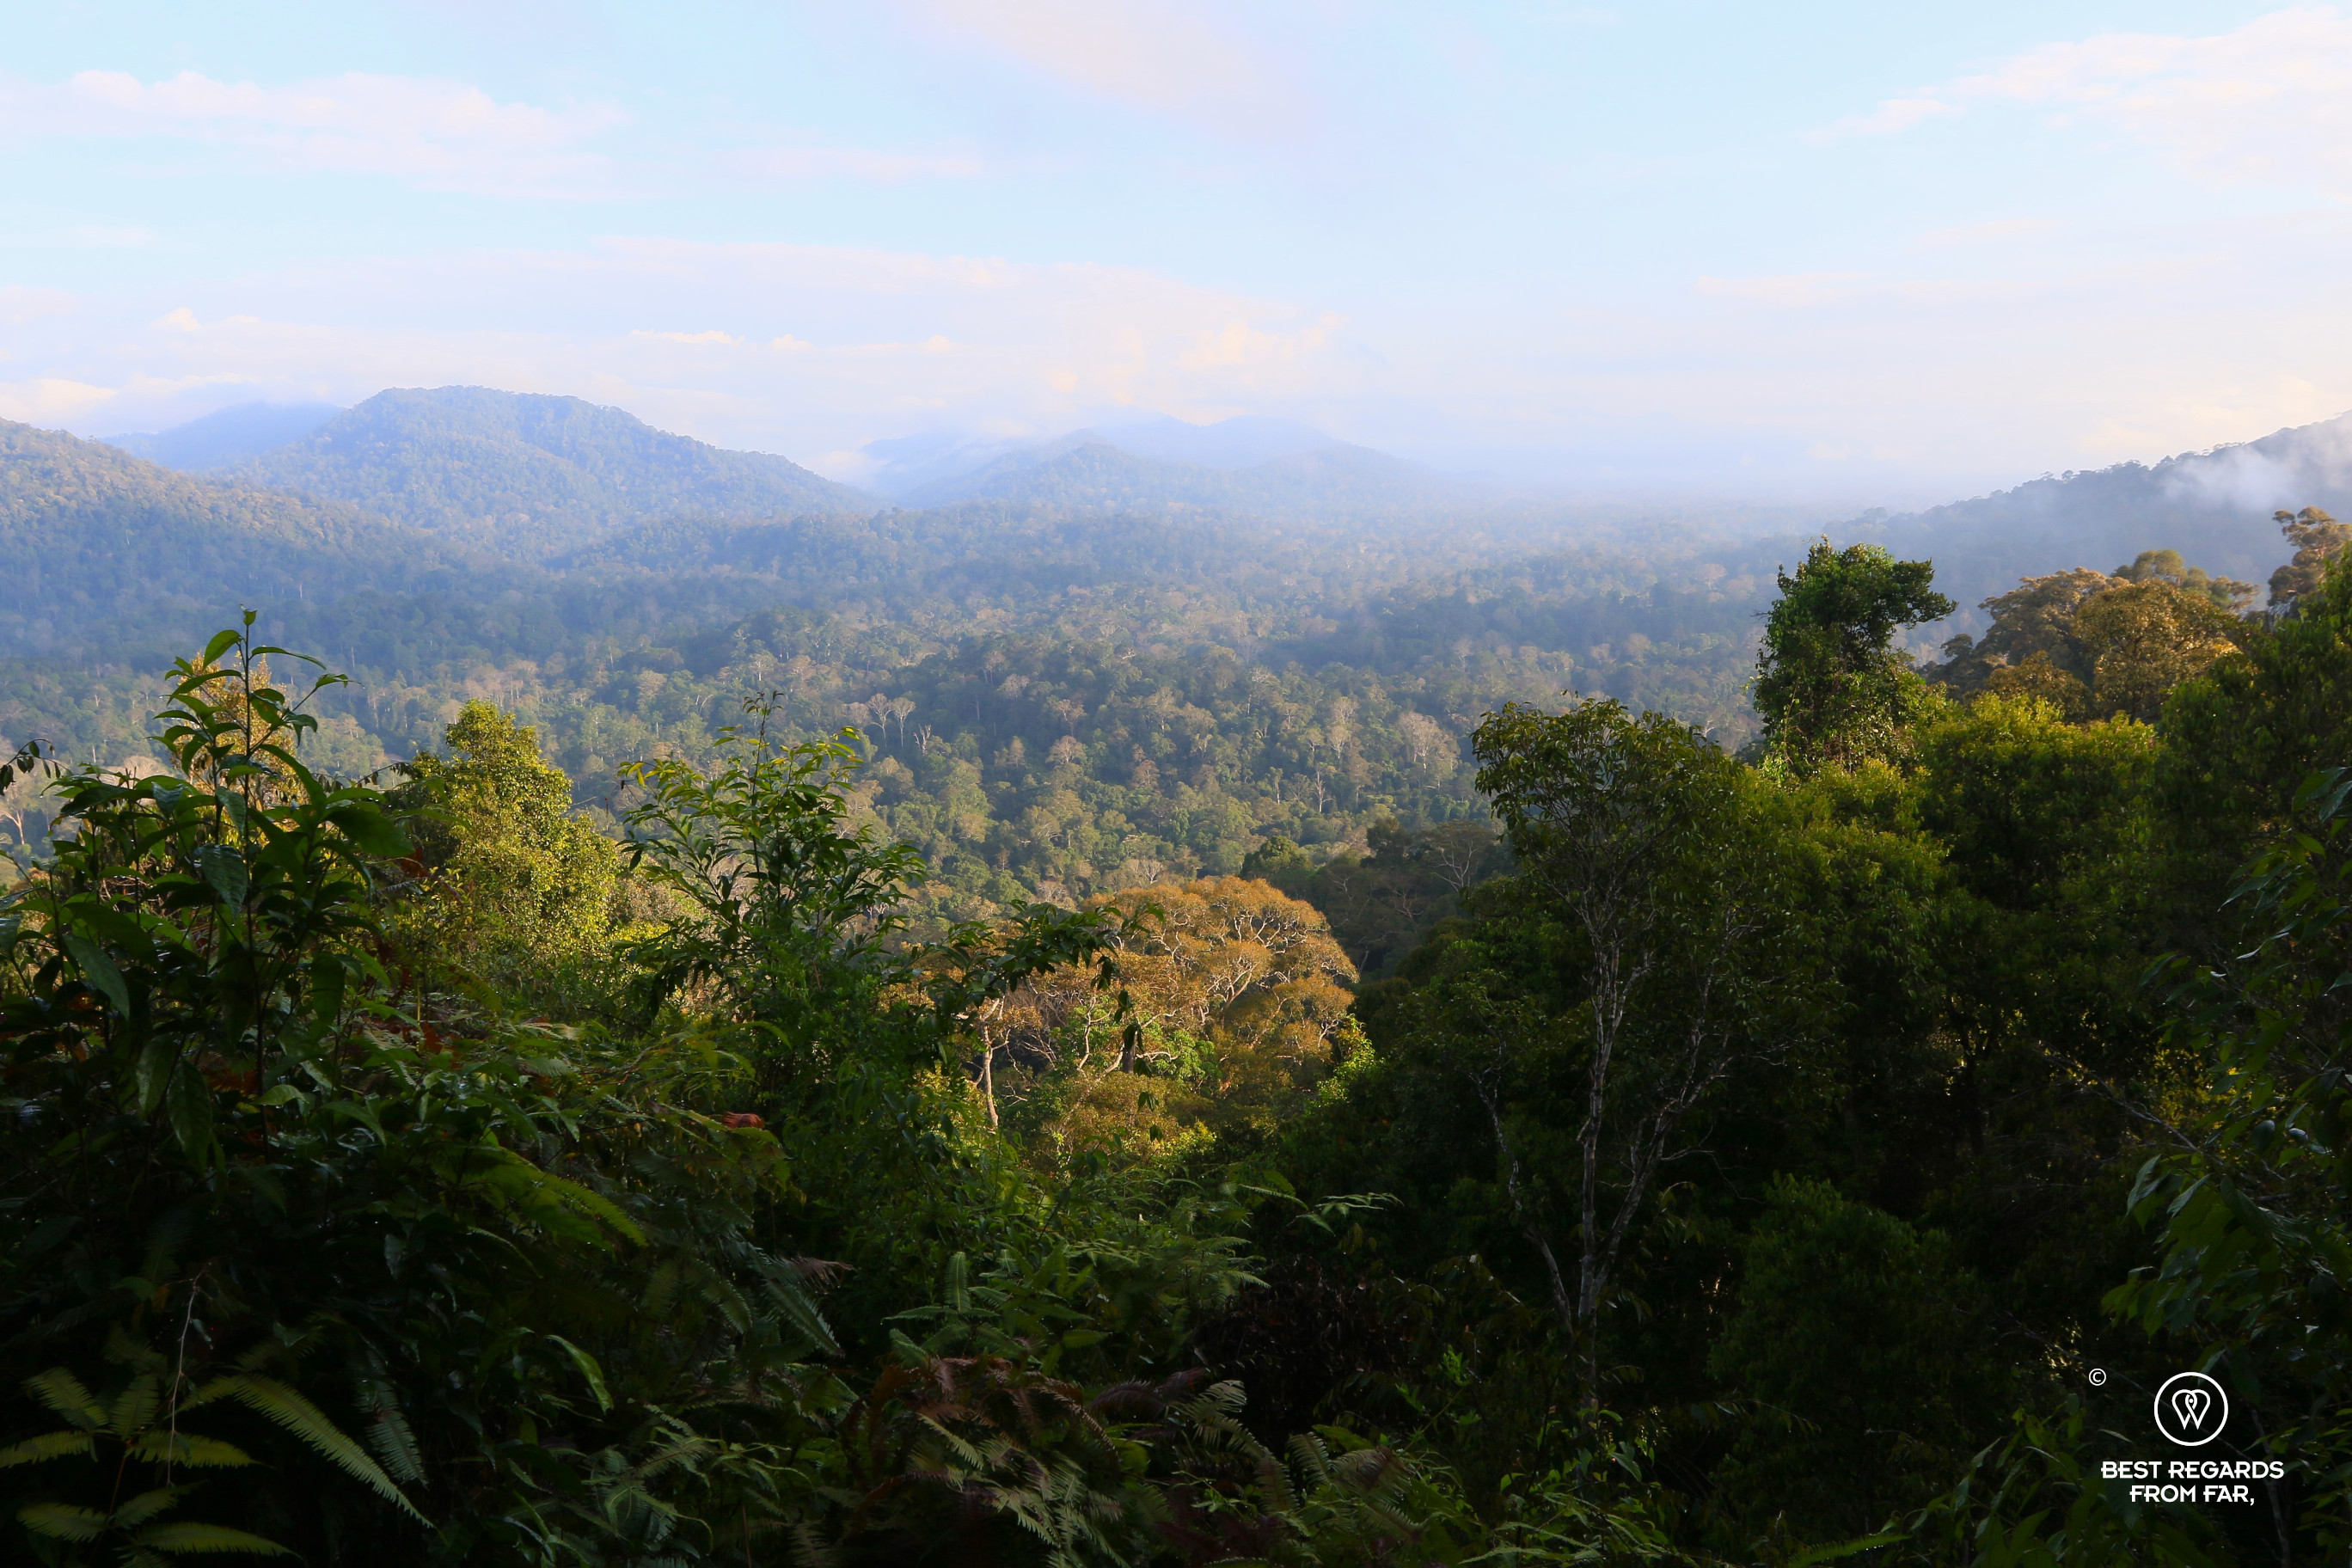 One of world’s oldest rainforests seen from the Bukit Teresek Mountain.